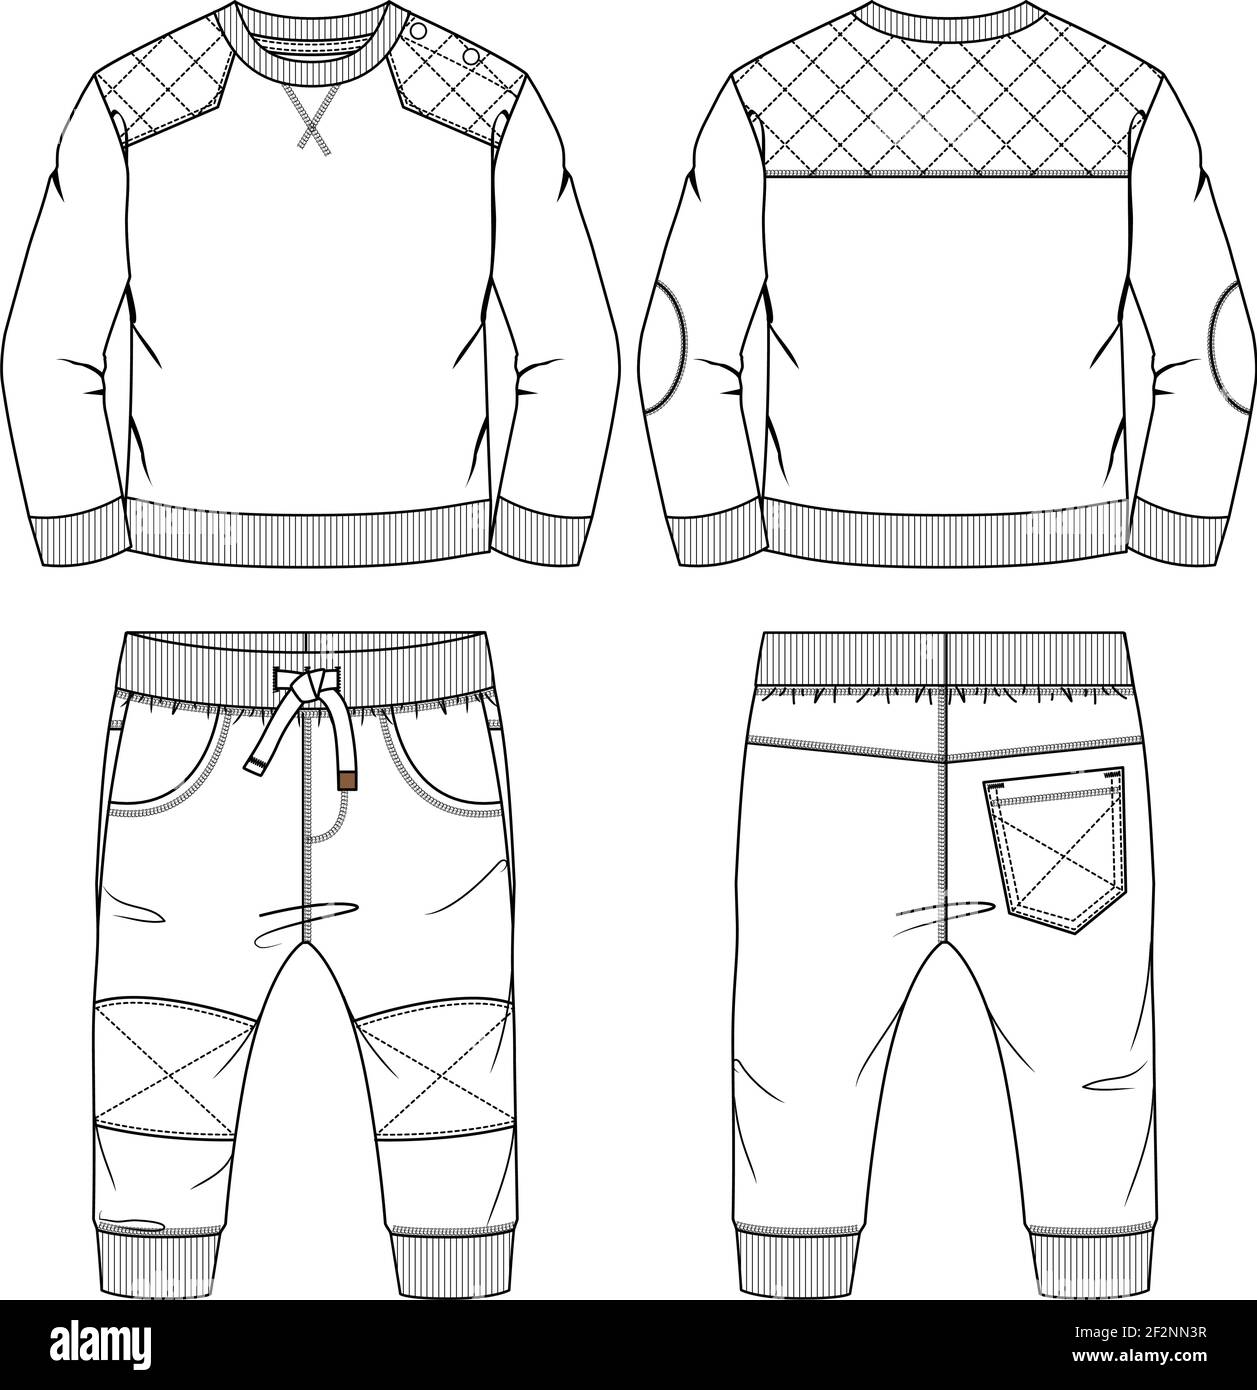 Infant Boys Fleece Set fashion flat sketch template. Technical Fashion Illustration. Jogger Pant with Pull-over Sweatshirt CAD Stock Vector